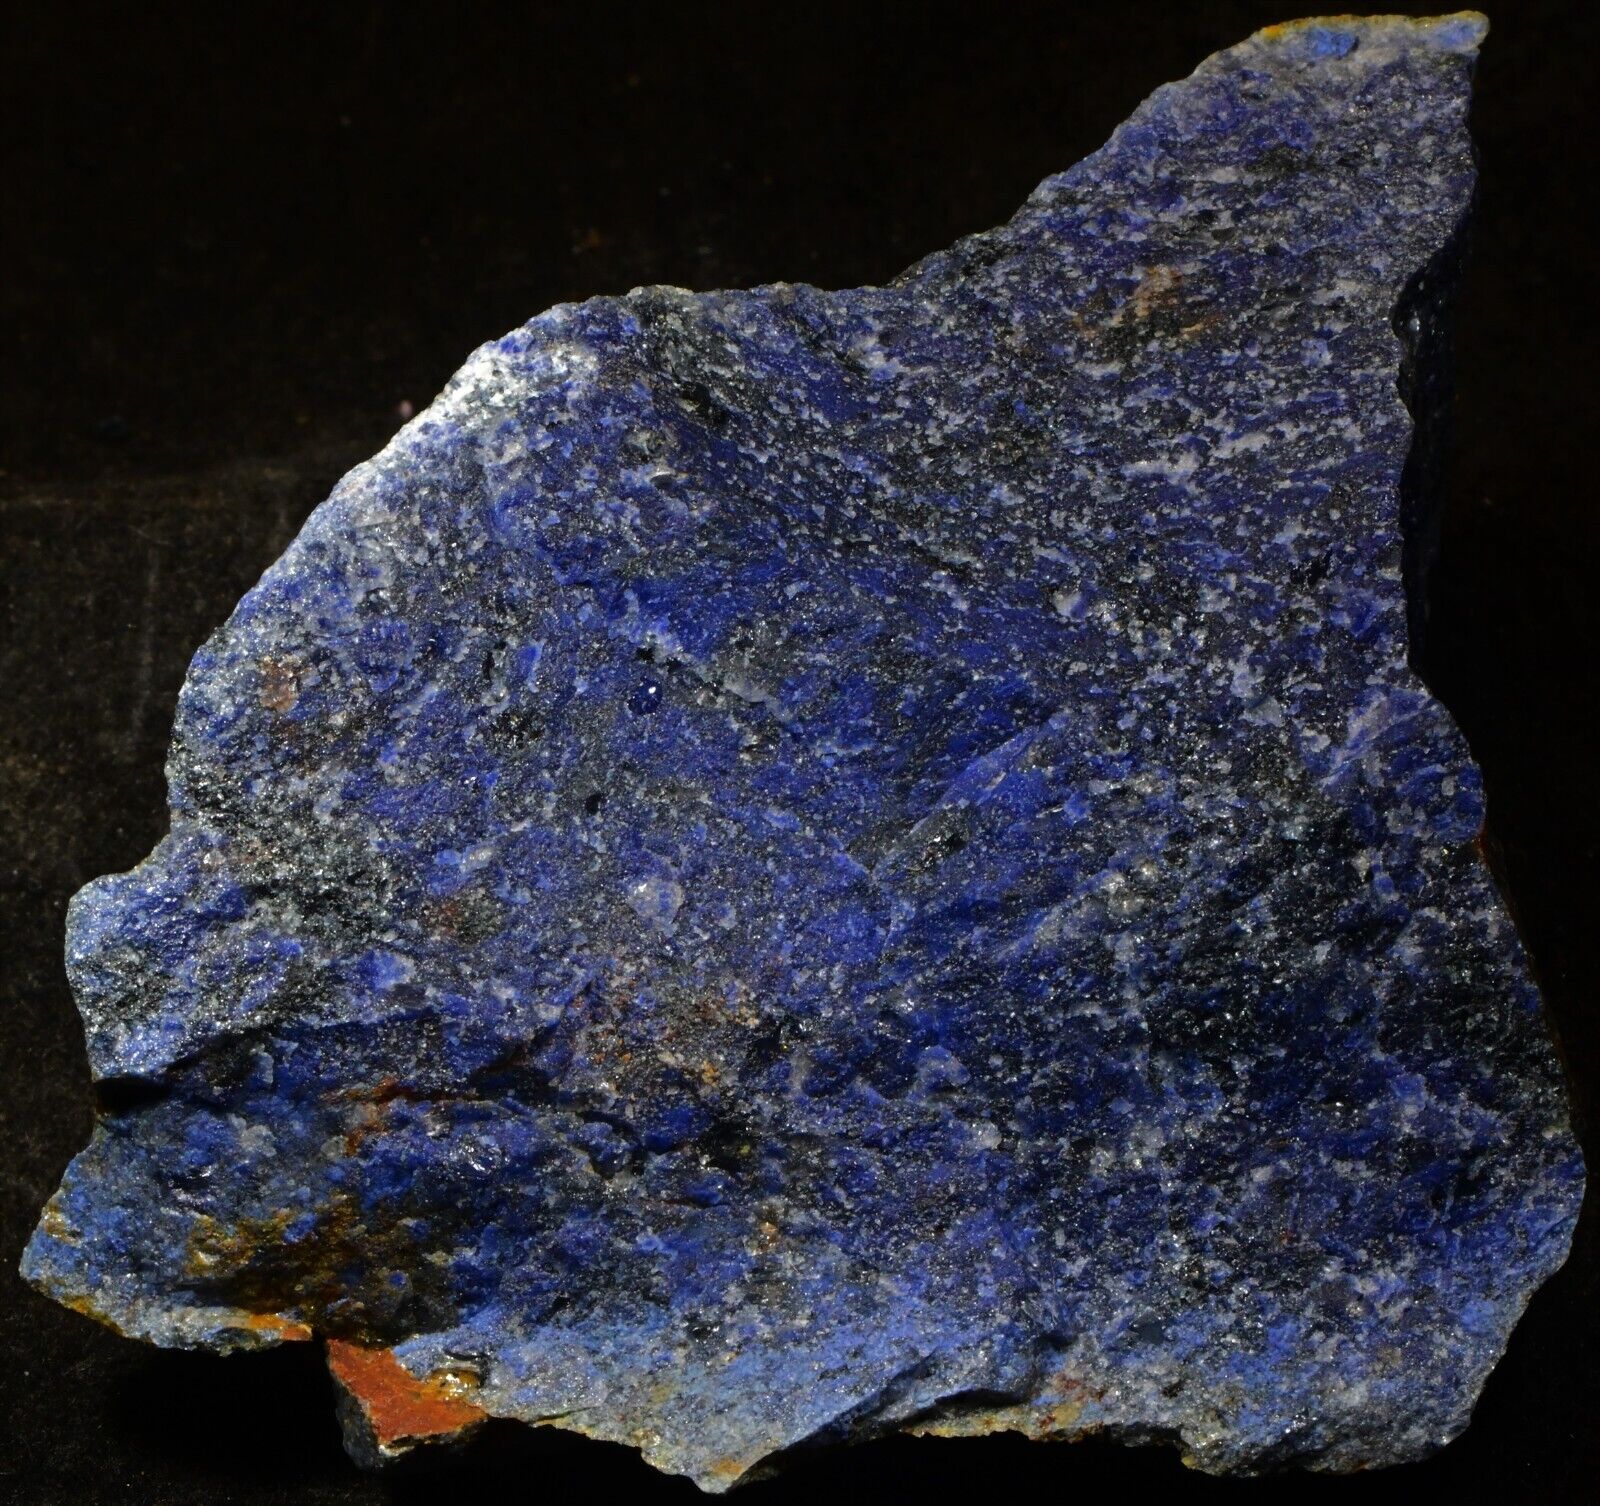 DEEPEST BLUE RARE DUMORTIERITE ALL SOLID 129G 5 X 3.5 X 3 CM FROM MOZAMBIQUE #1